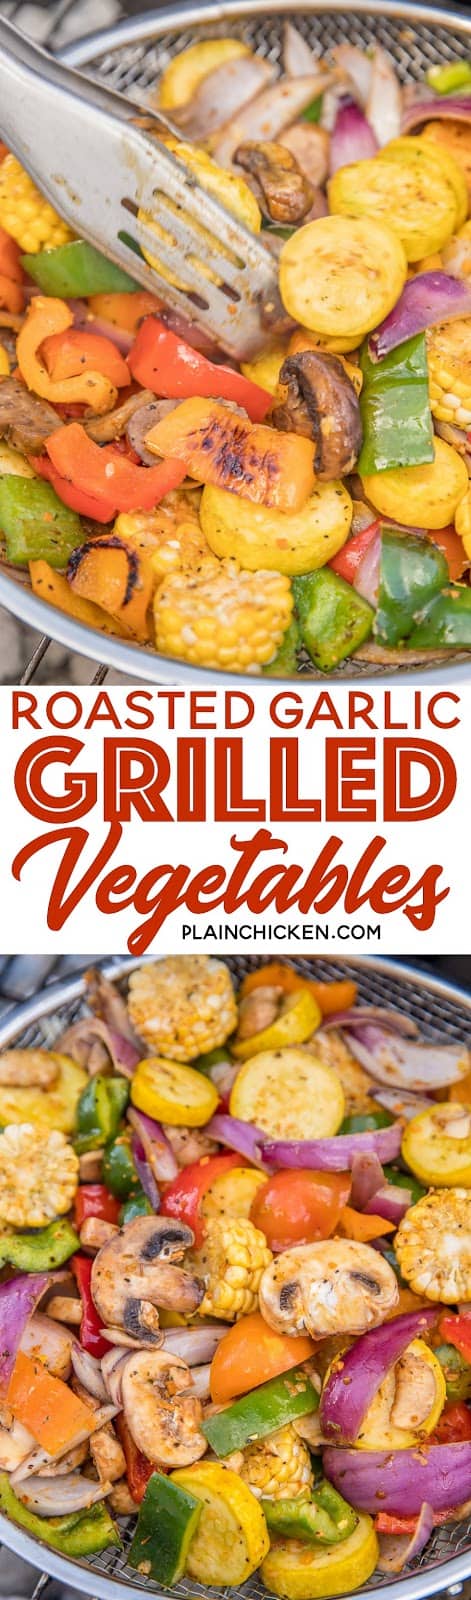 Roasted Garlic Grilled Vegetables - great as a side dish or tossed in pasta. Such an EASY side dish!! Bell peppers, onion, mushrooms, corn and squash tossed in olive oil, brown sugar, paprika, chili powder, salt, pepper and garlic. Ready to eat in about 15 minutes! #grilling #vegetables #sidedish #easysidedish #healthysidedish #lowcarb